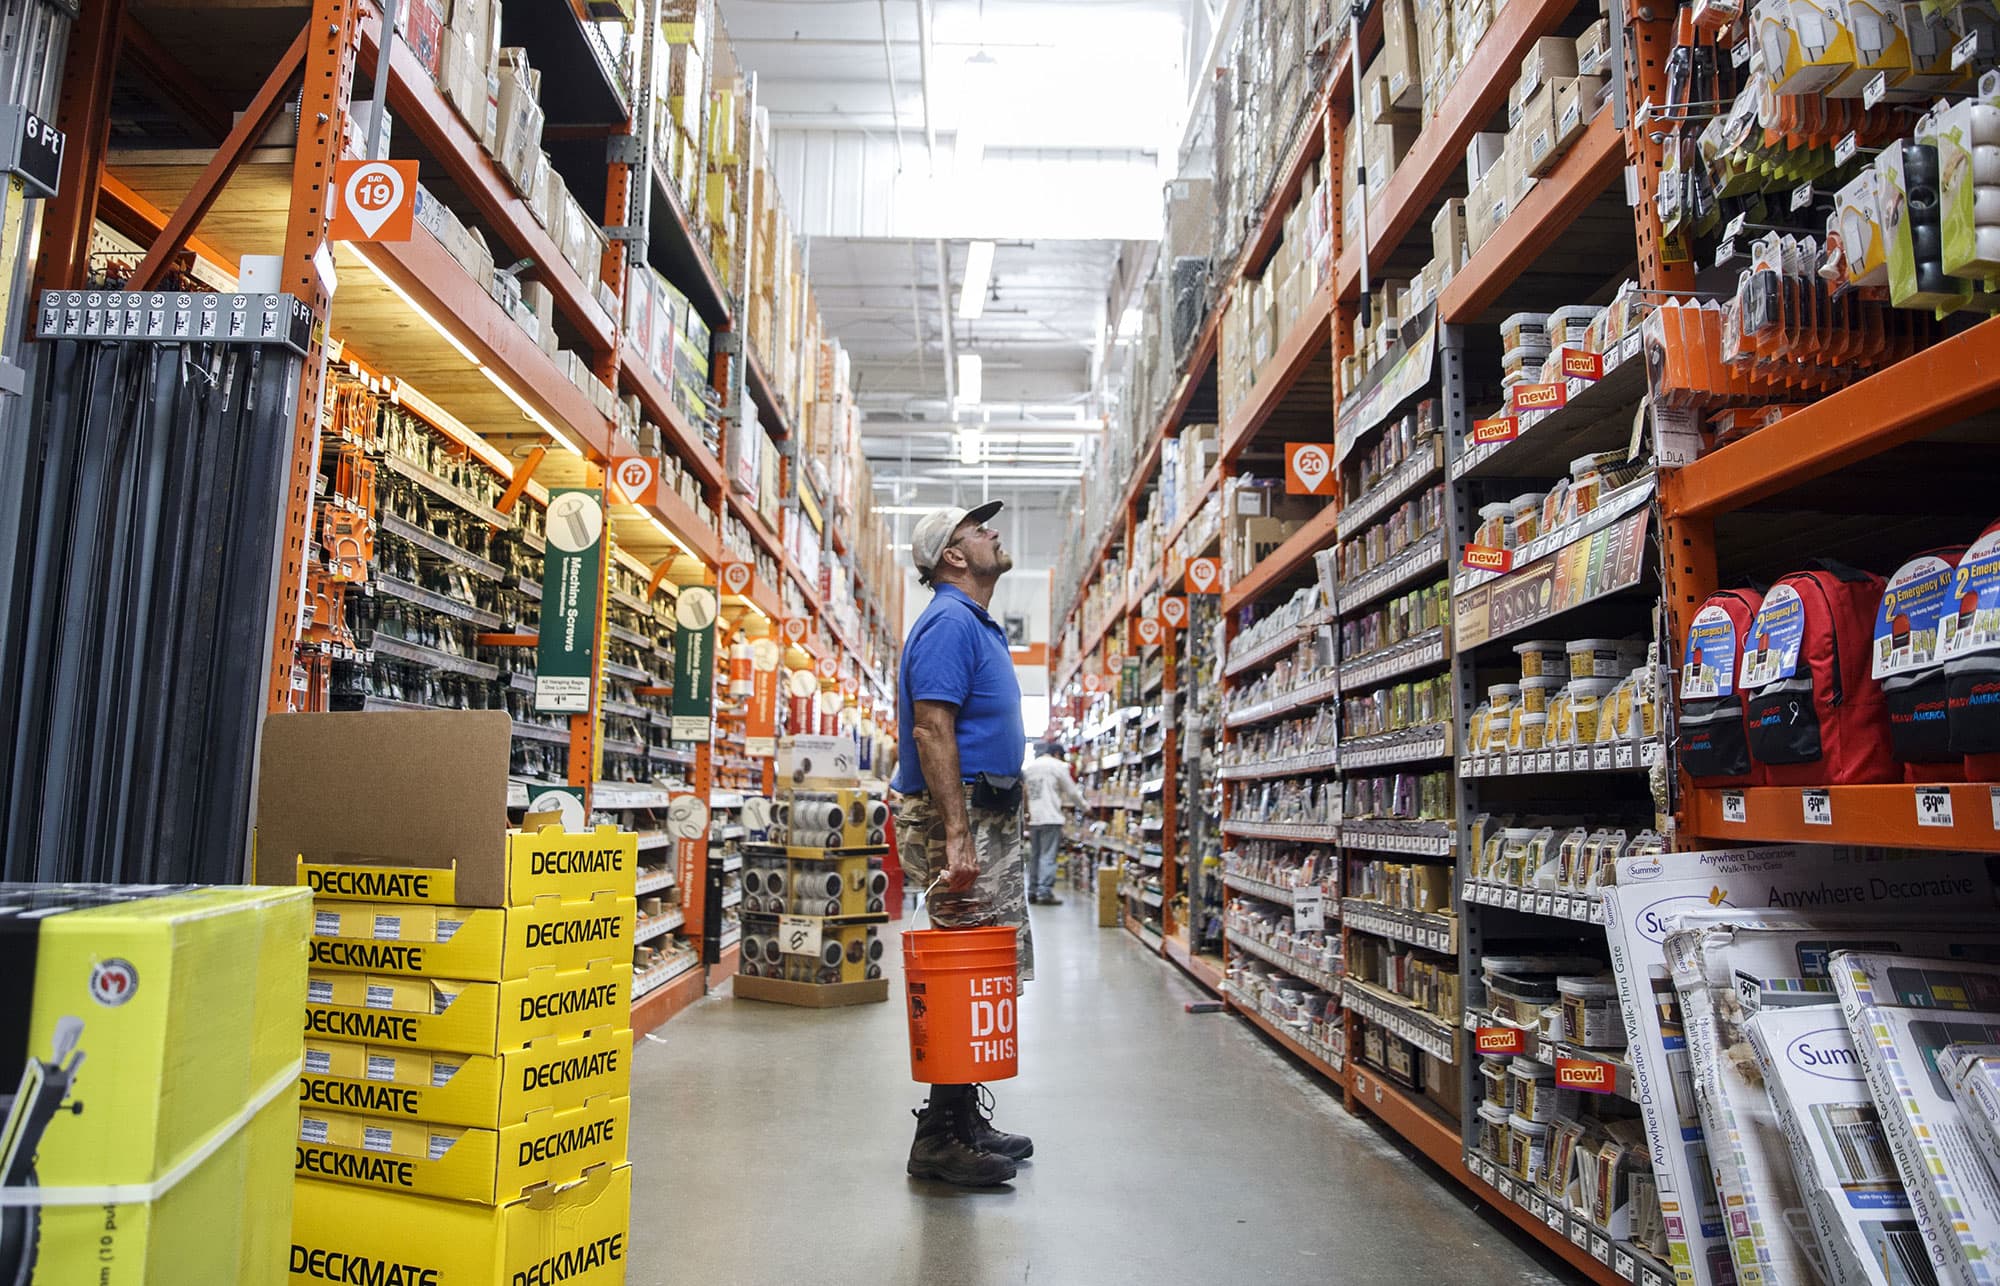 Home Depot shares fall on fourth-quarter earnings miss